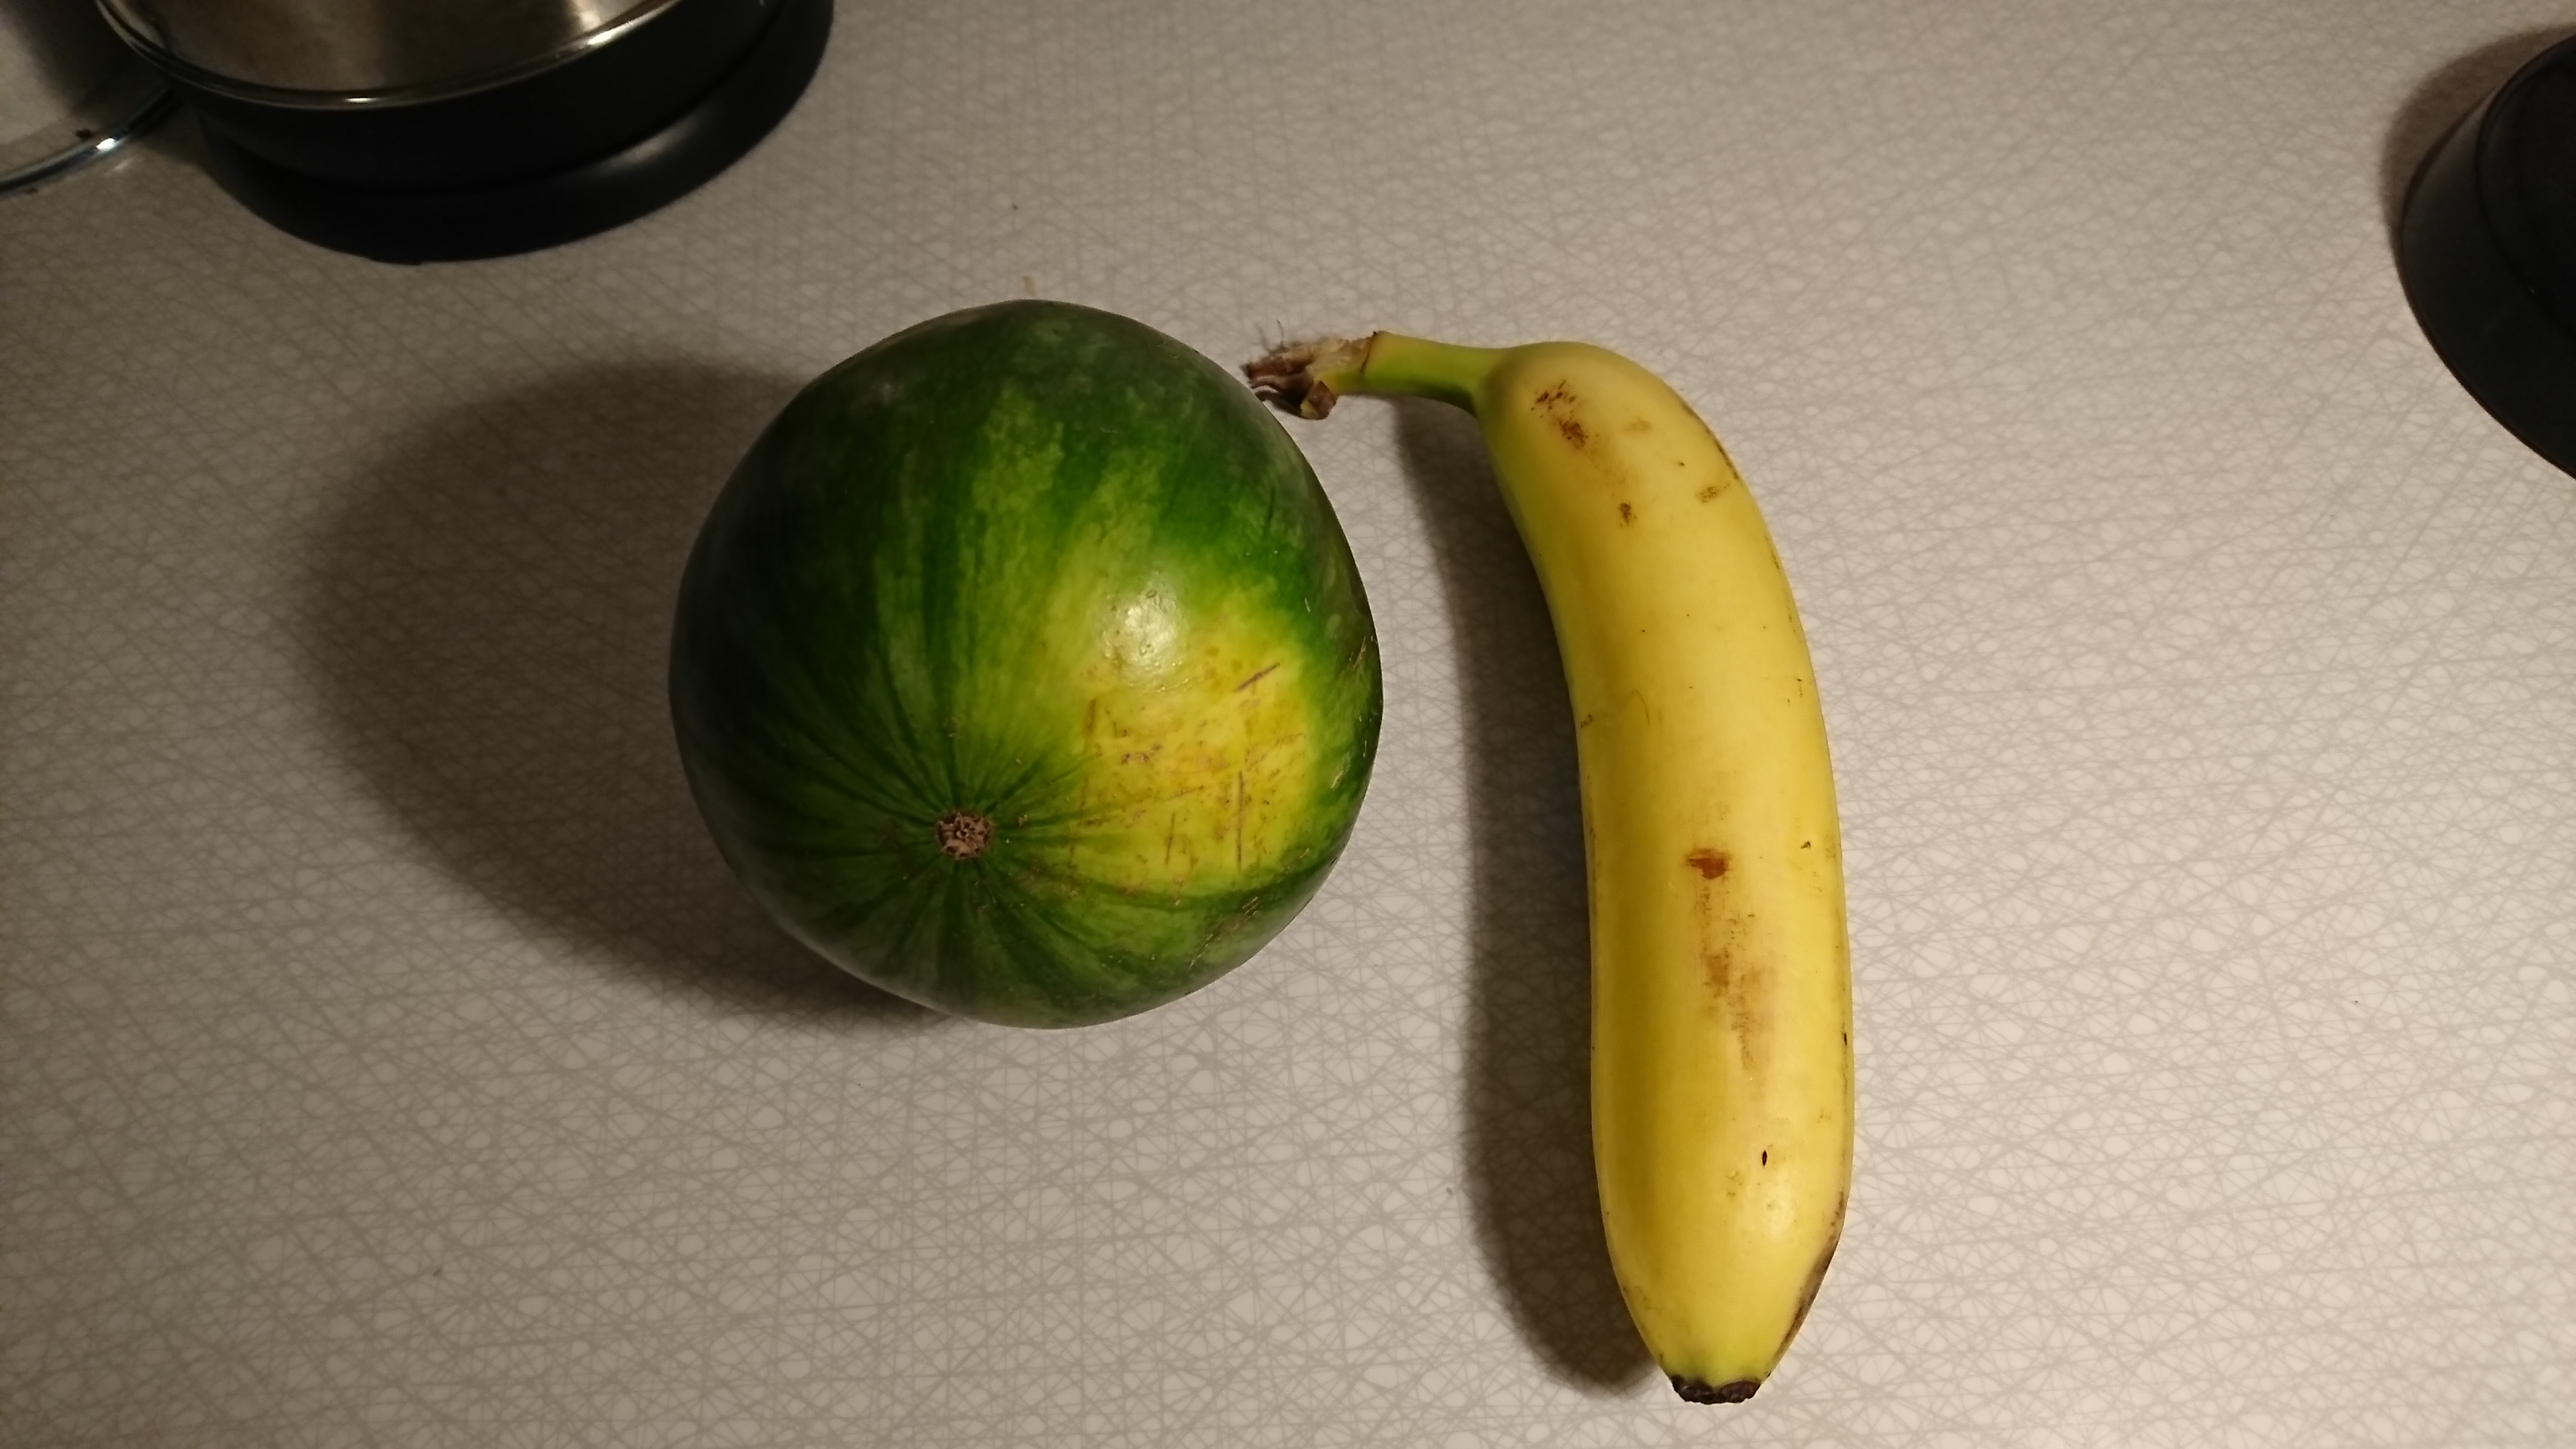 "I promised to go back to the market today and see if the melon was still there. And BEHOLD, the tiny melon was still there.With the melon now in my possession, I was gonna do this properly." "Banana for scale!"